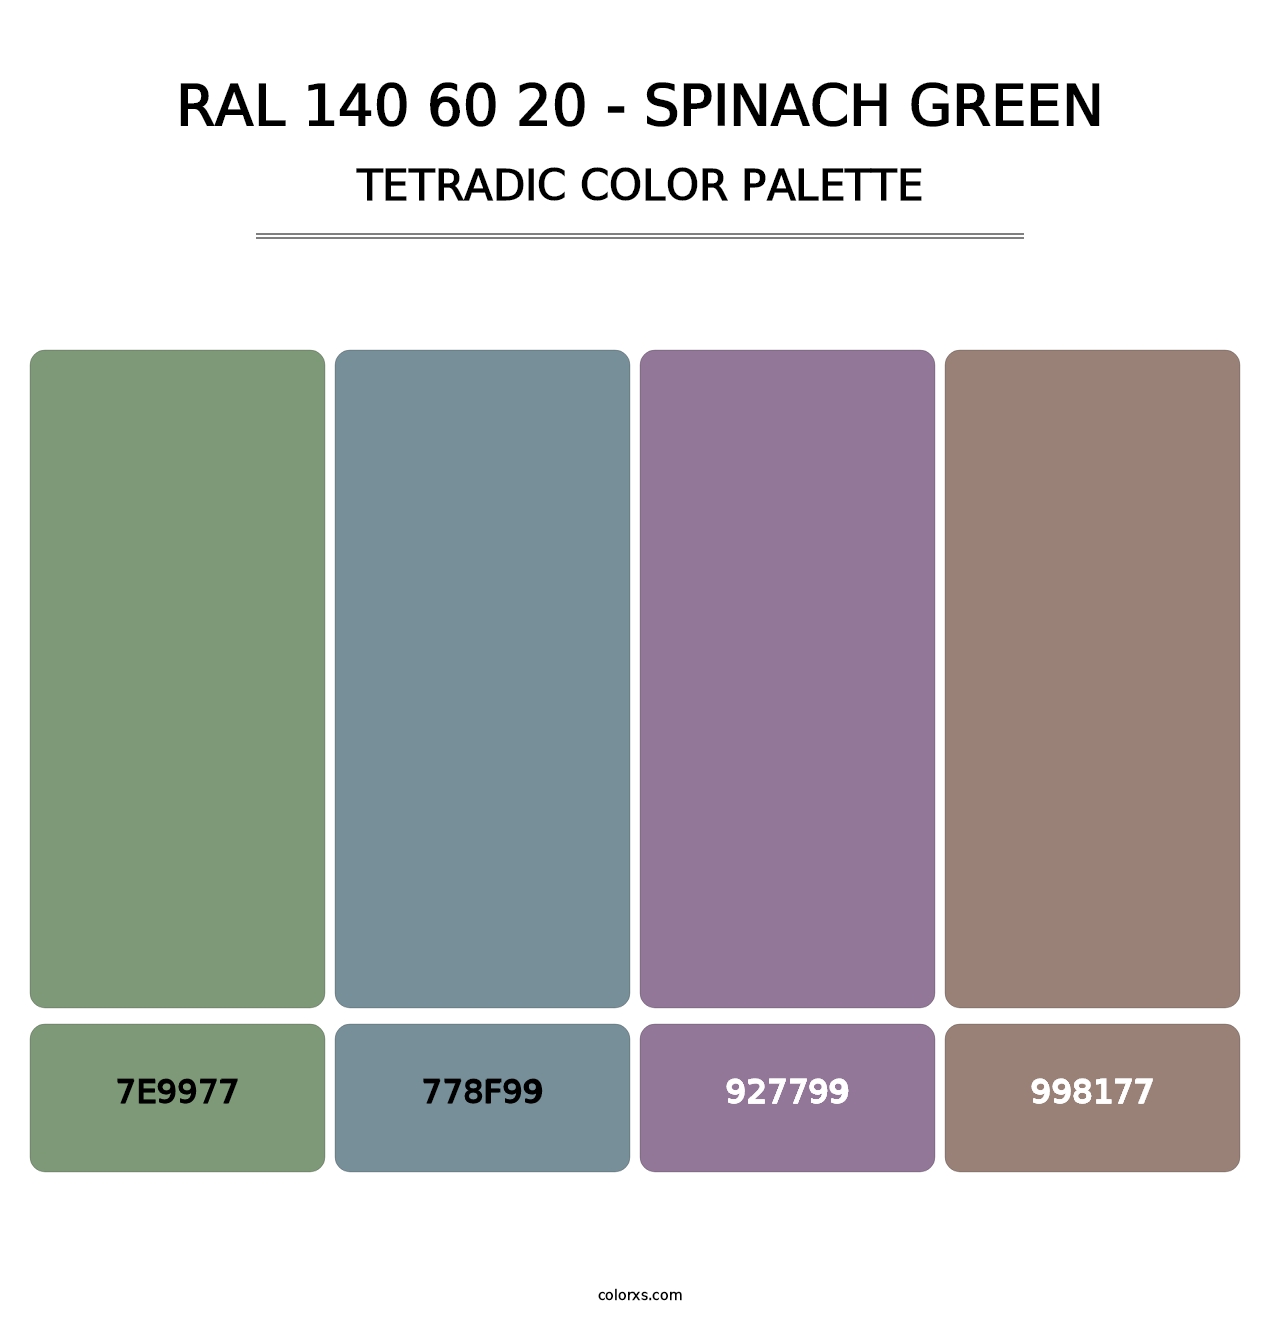 RAL 140 60 20 - Spinach Green - Tetradic Color Palette